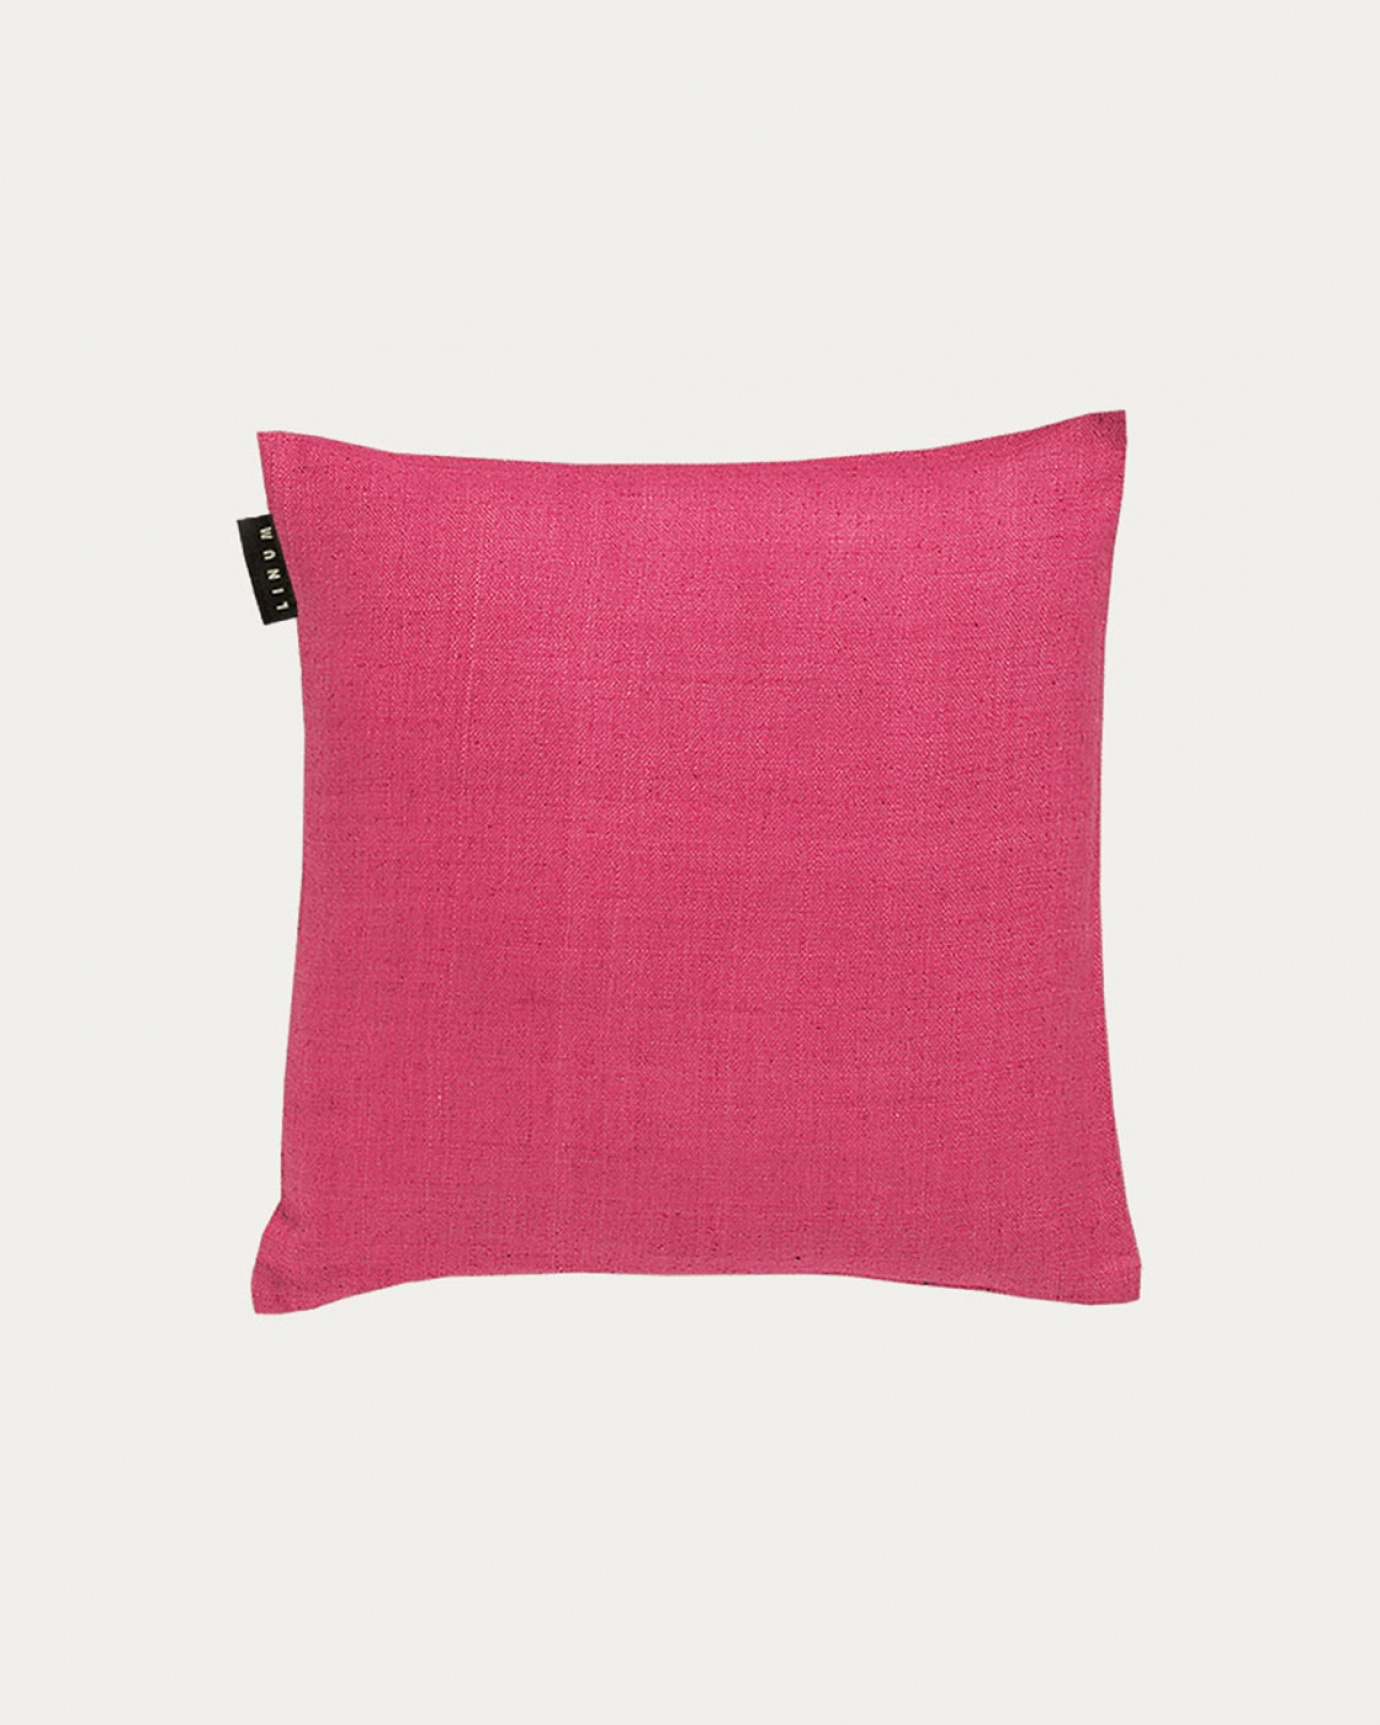 Product image dark rose pink SETA cushion cover made of 100% raw silk that gives a nice lustre from LINUM DESIGN. Size 40x40 cm.